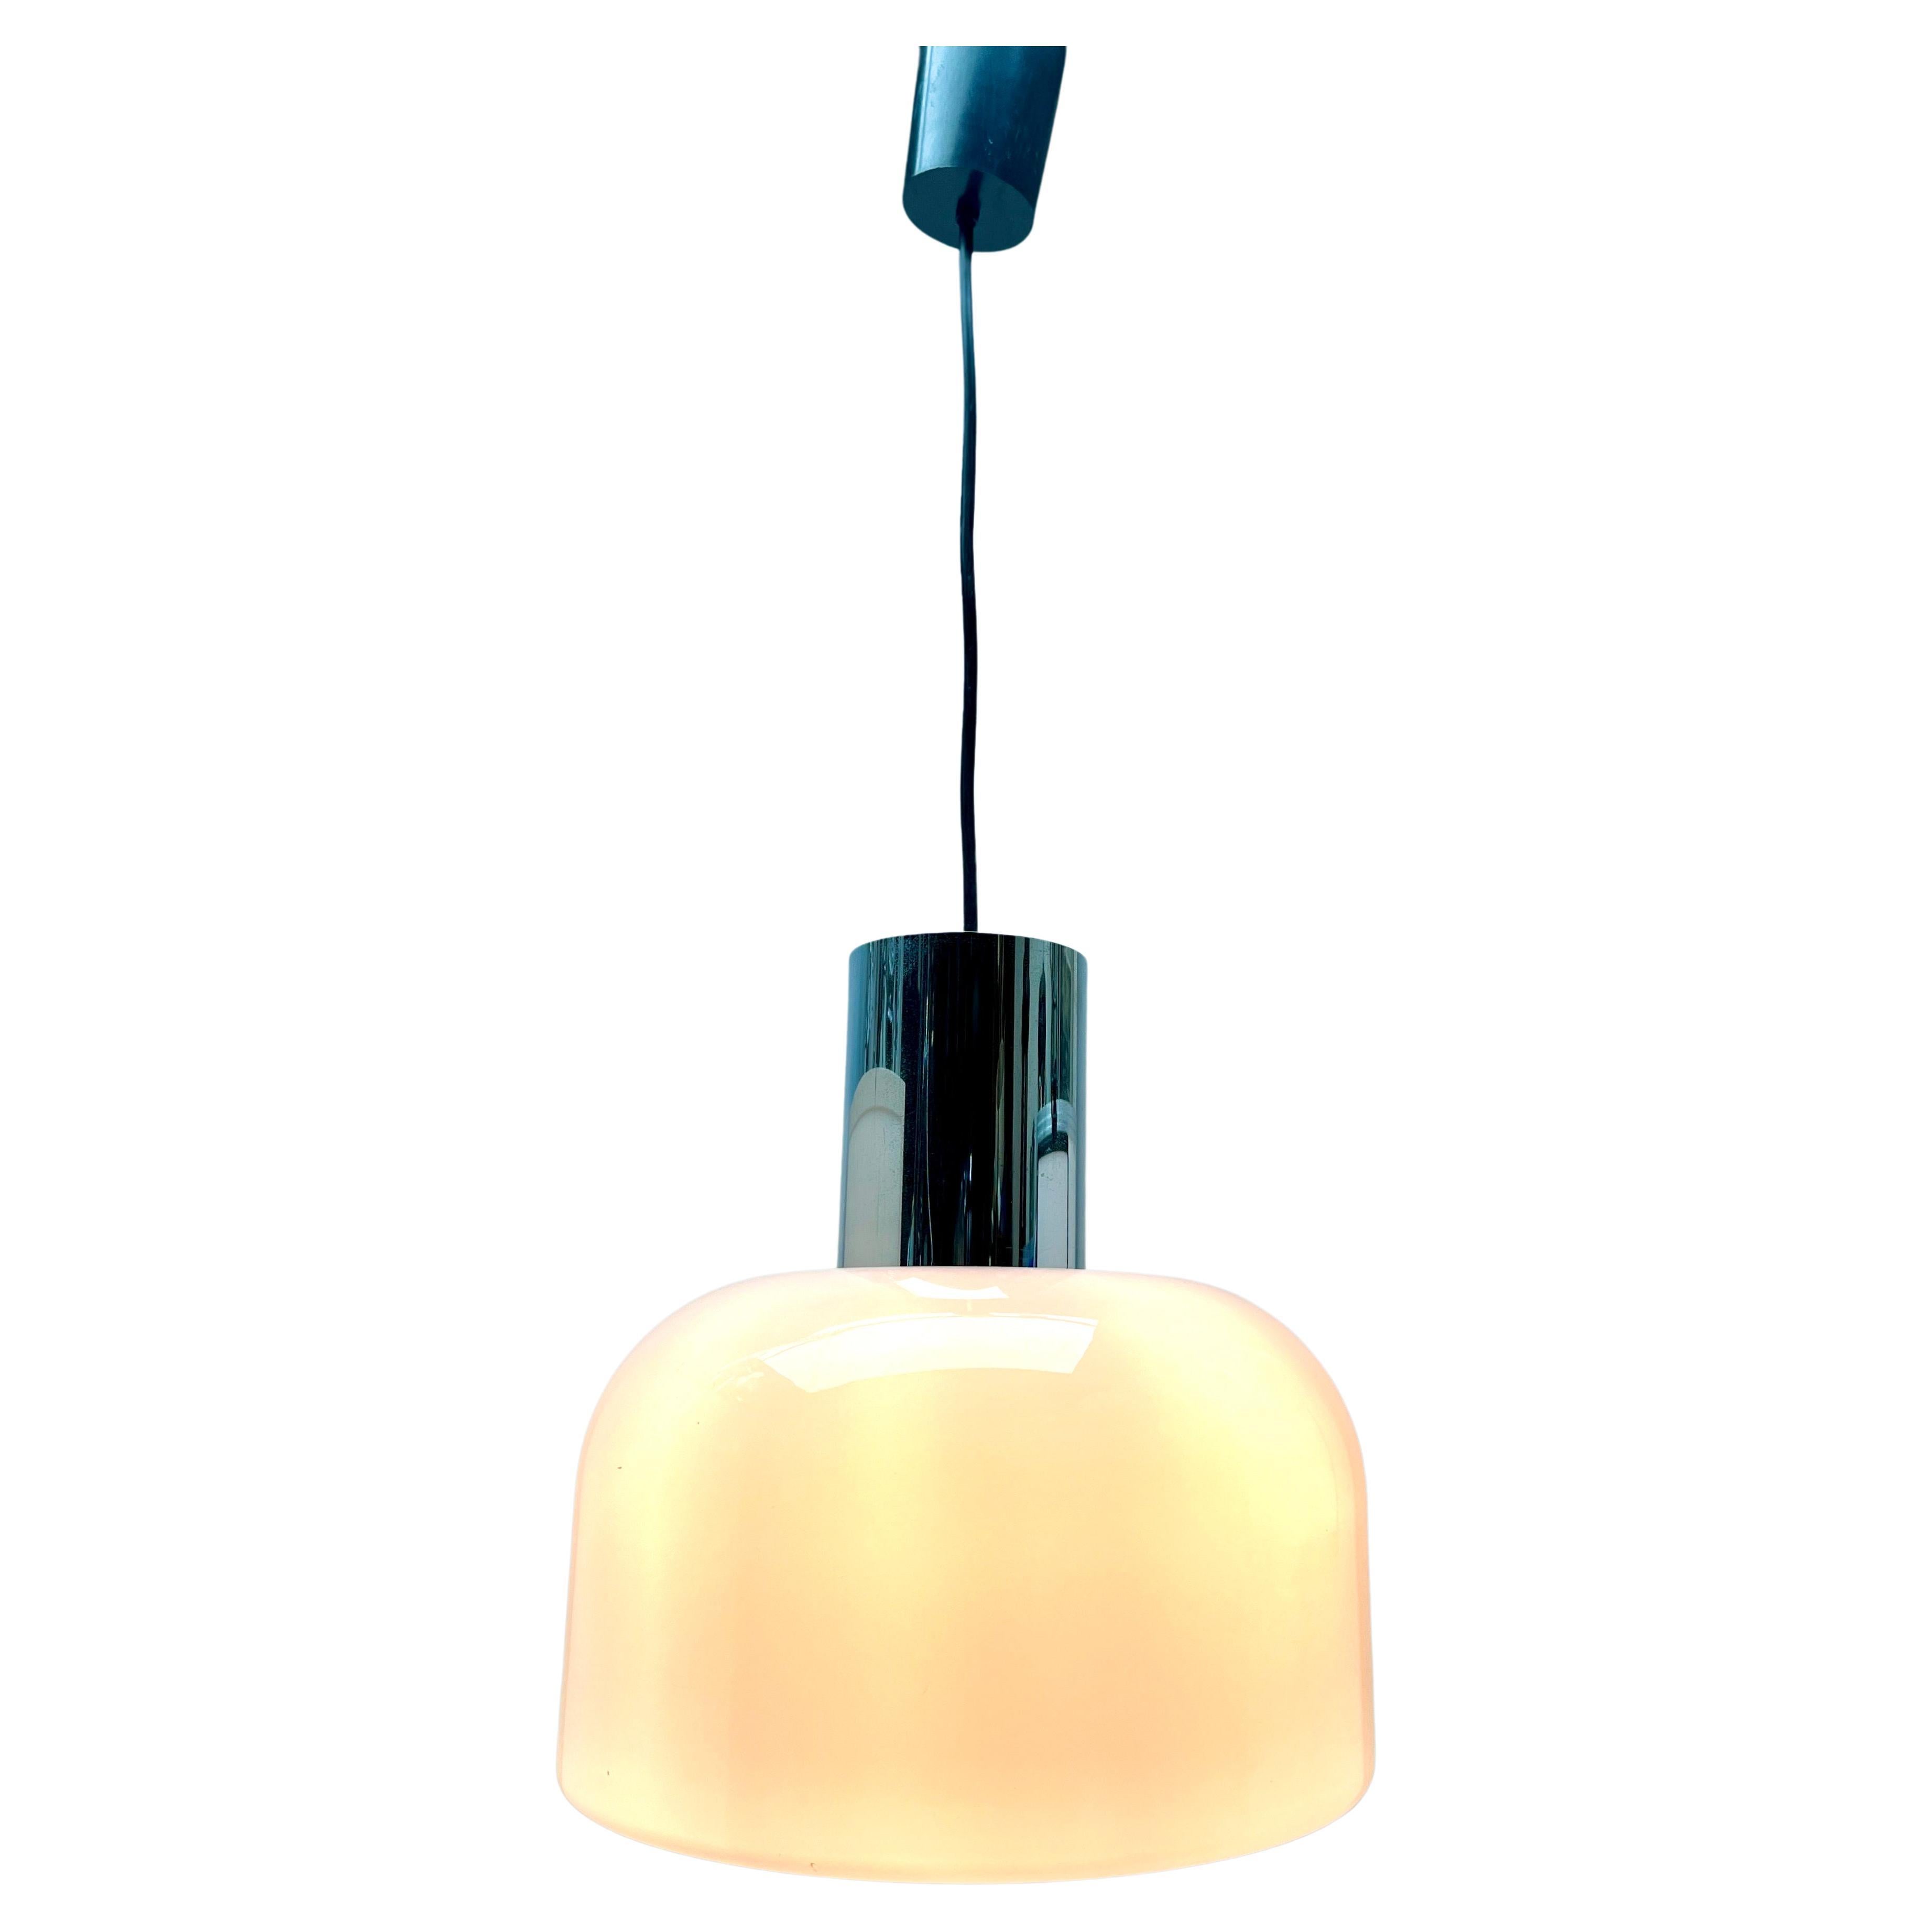 Glashütte Limburg Mid-Century Modern blown glass pendant/suspension fixture.

4 Pieces in stock

Size shade: Height 30 cm 11.81 inch, diameter 30 cm 11.81 inch 
On an adjustable cable.
As service: We can adjust the lamp height for you in advance if